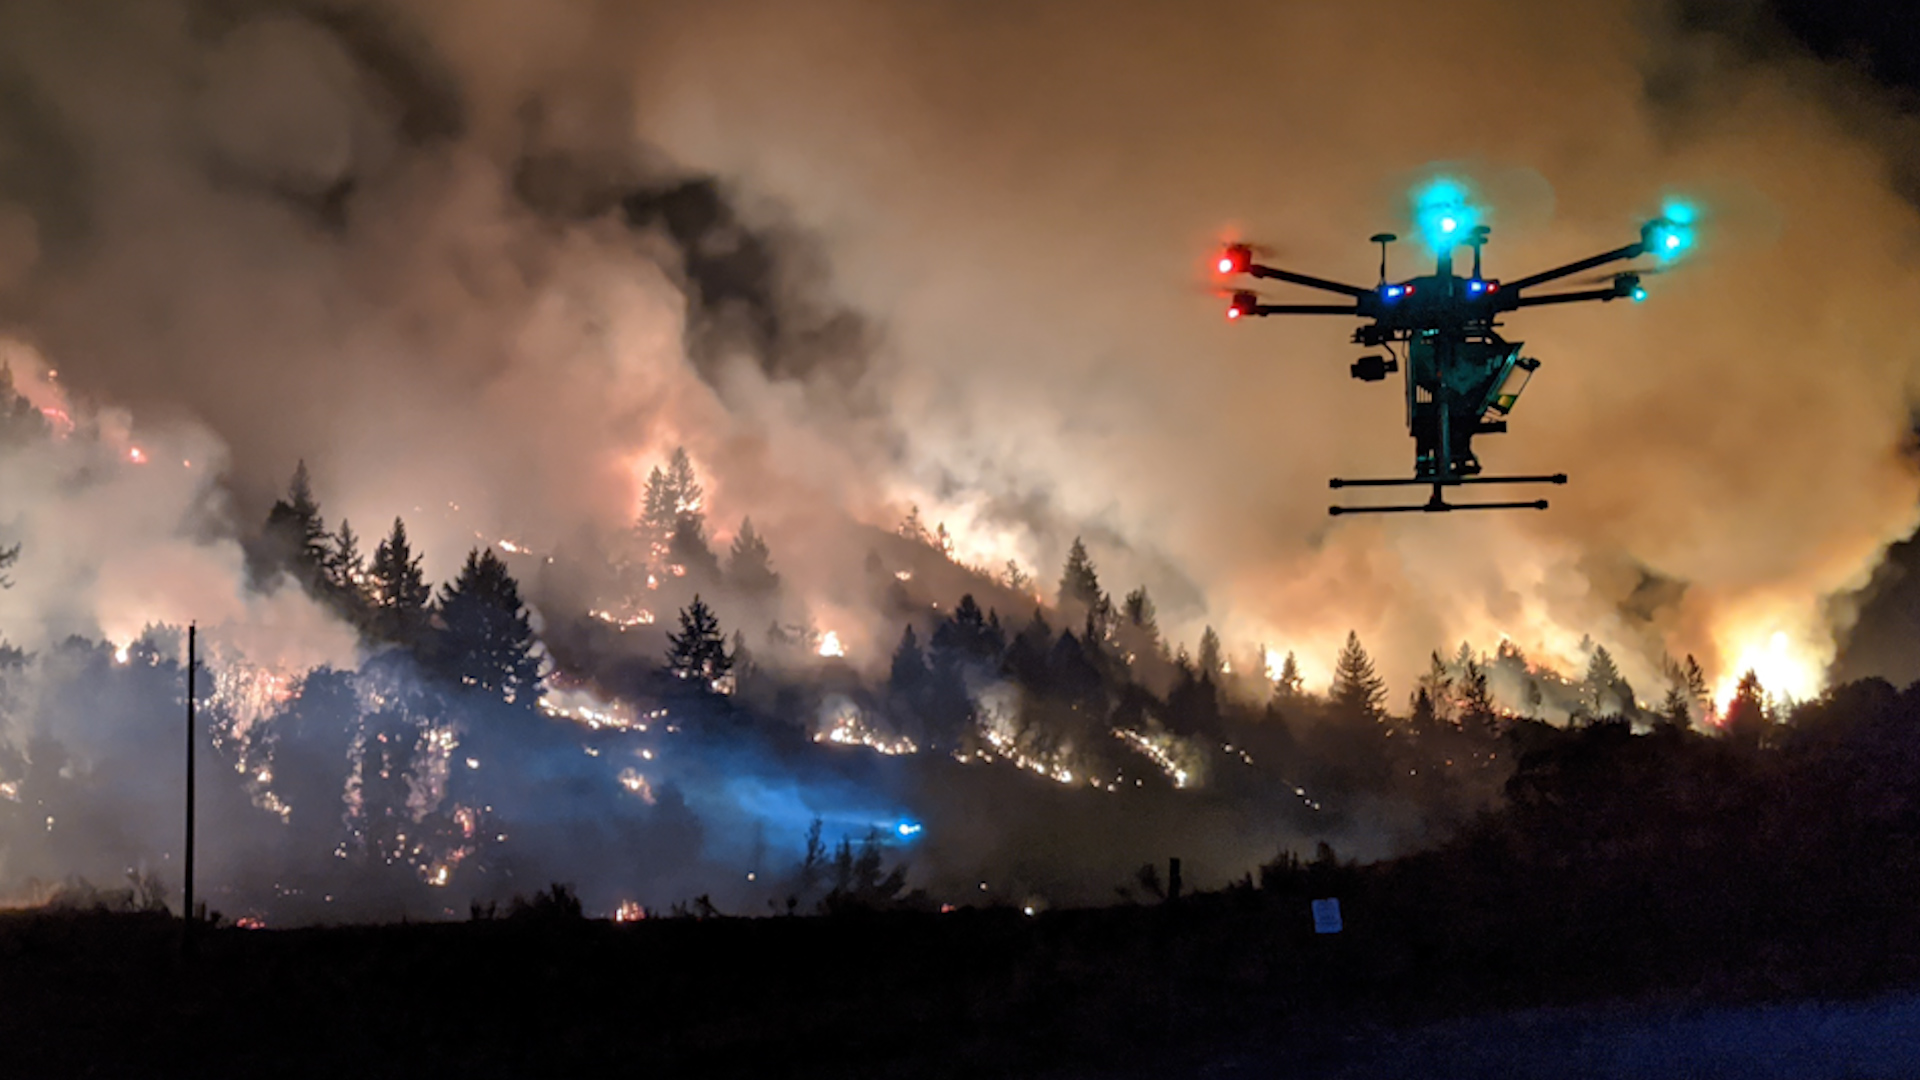 Unmanned drones that drop fireballs are one of the latest weapons against wildfires in the U.S....